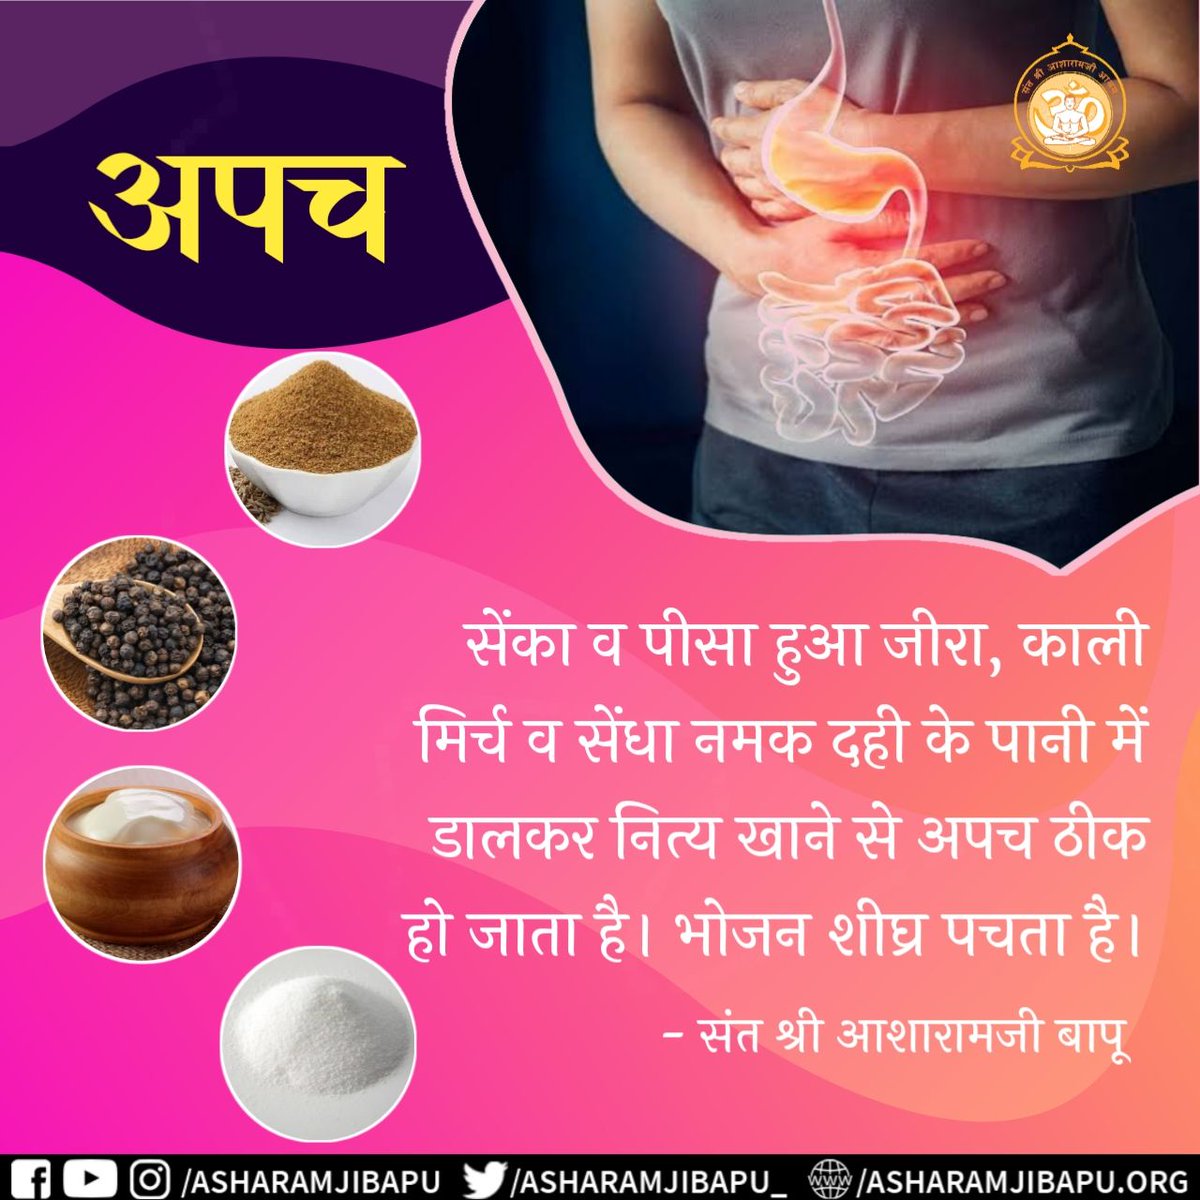 Sant Shri Asharamji Bapu has explained the glory of Science Of Ayurveda & shared simple & homely 
Health Tips like:
To get rid of gastric problems one should drink juice of Amla & ginger !
Do benefit from such simple #स्वास्थ्य_के_नुस्खे to stay healthy with no much cost!